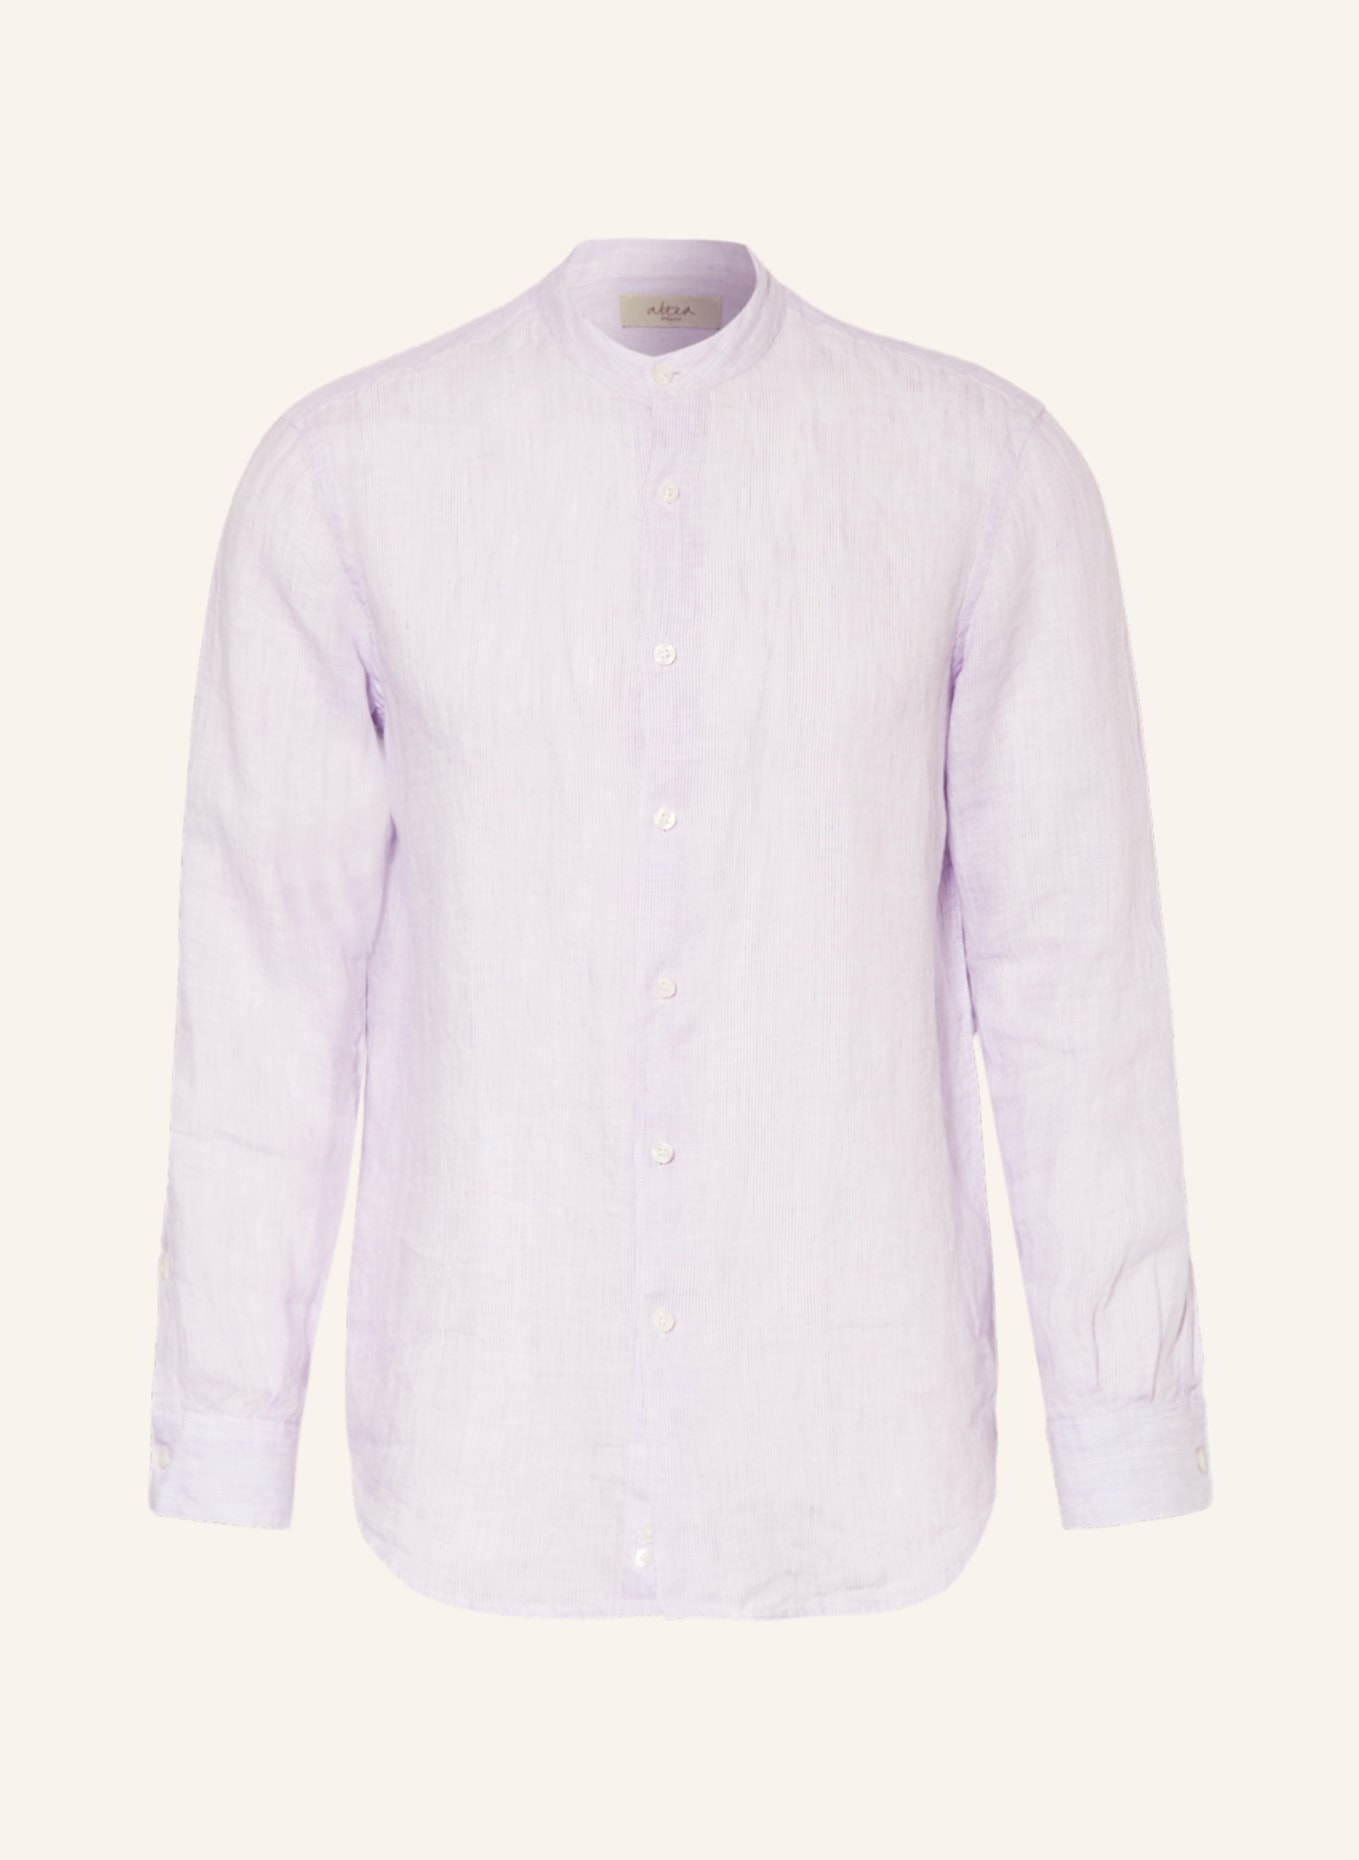 altea Linen shirt regular fit with stand-up collar, Color: LIGHT PURPLE/ WHITE (Image 1)